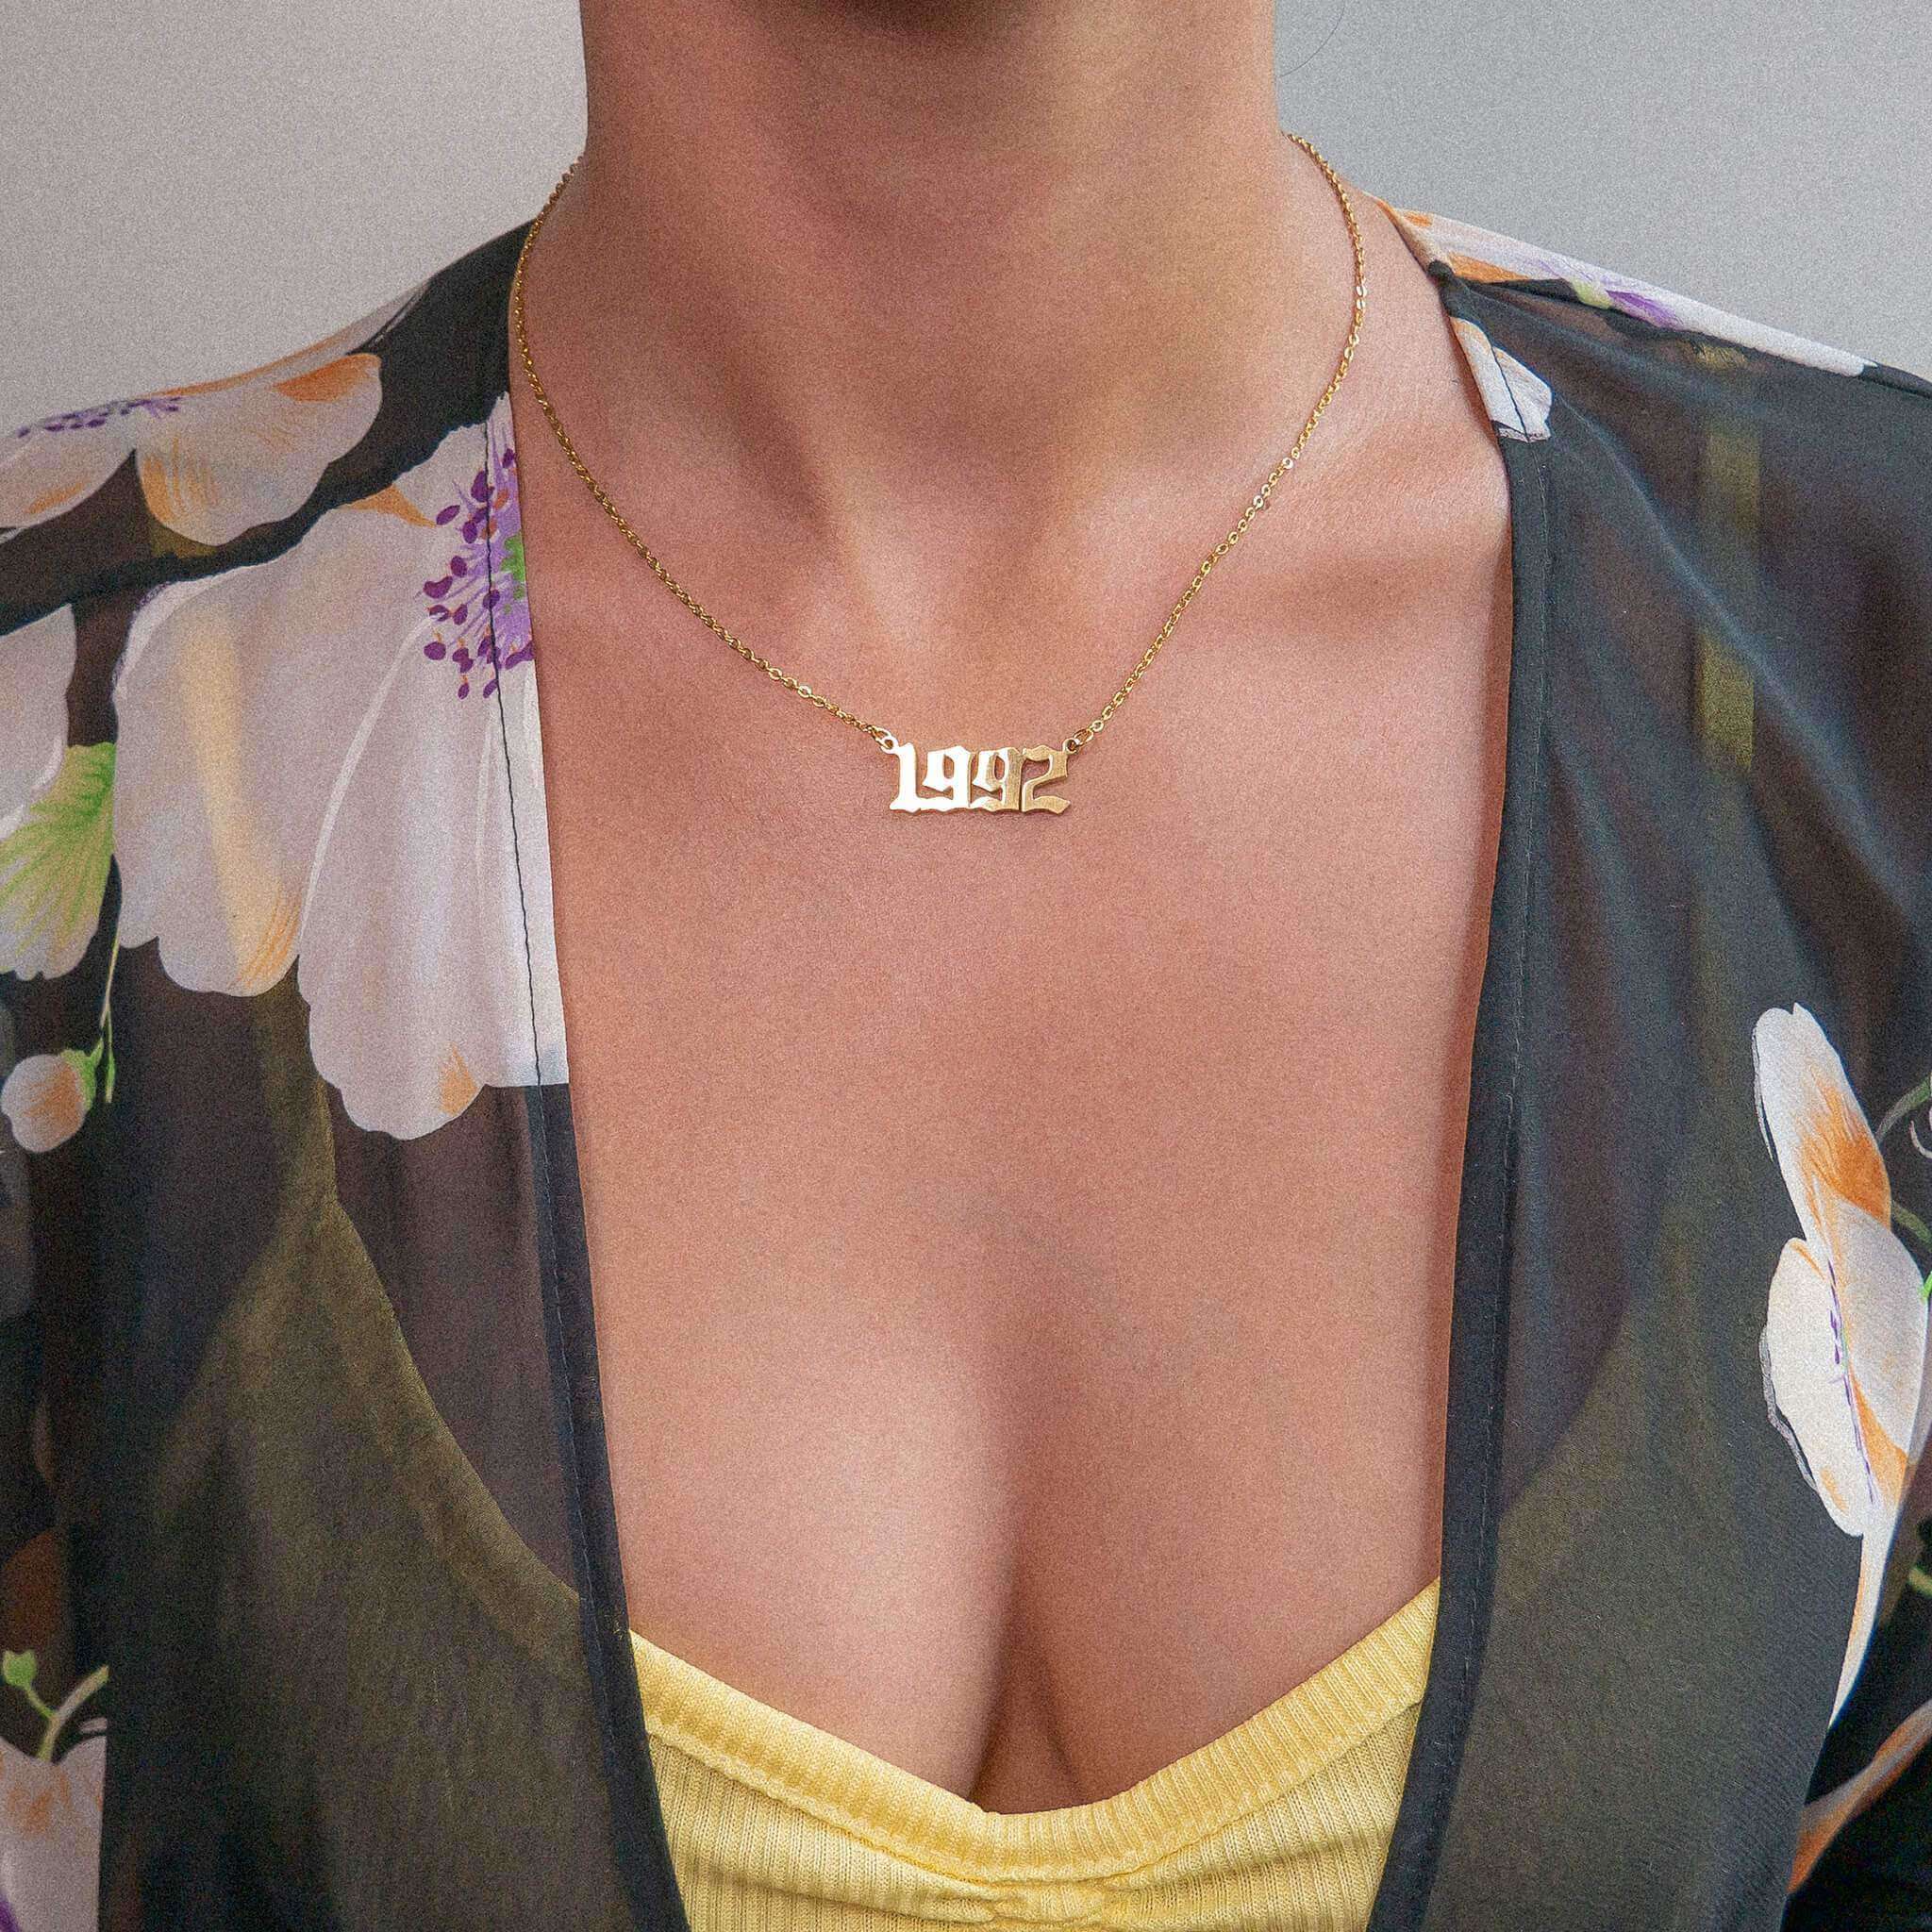 Woman wearing a yellow strappy top and flowery see-through cardigan sporting a 1993 gold birth year chain necklace